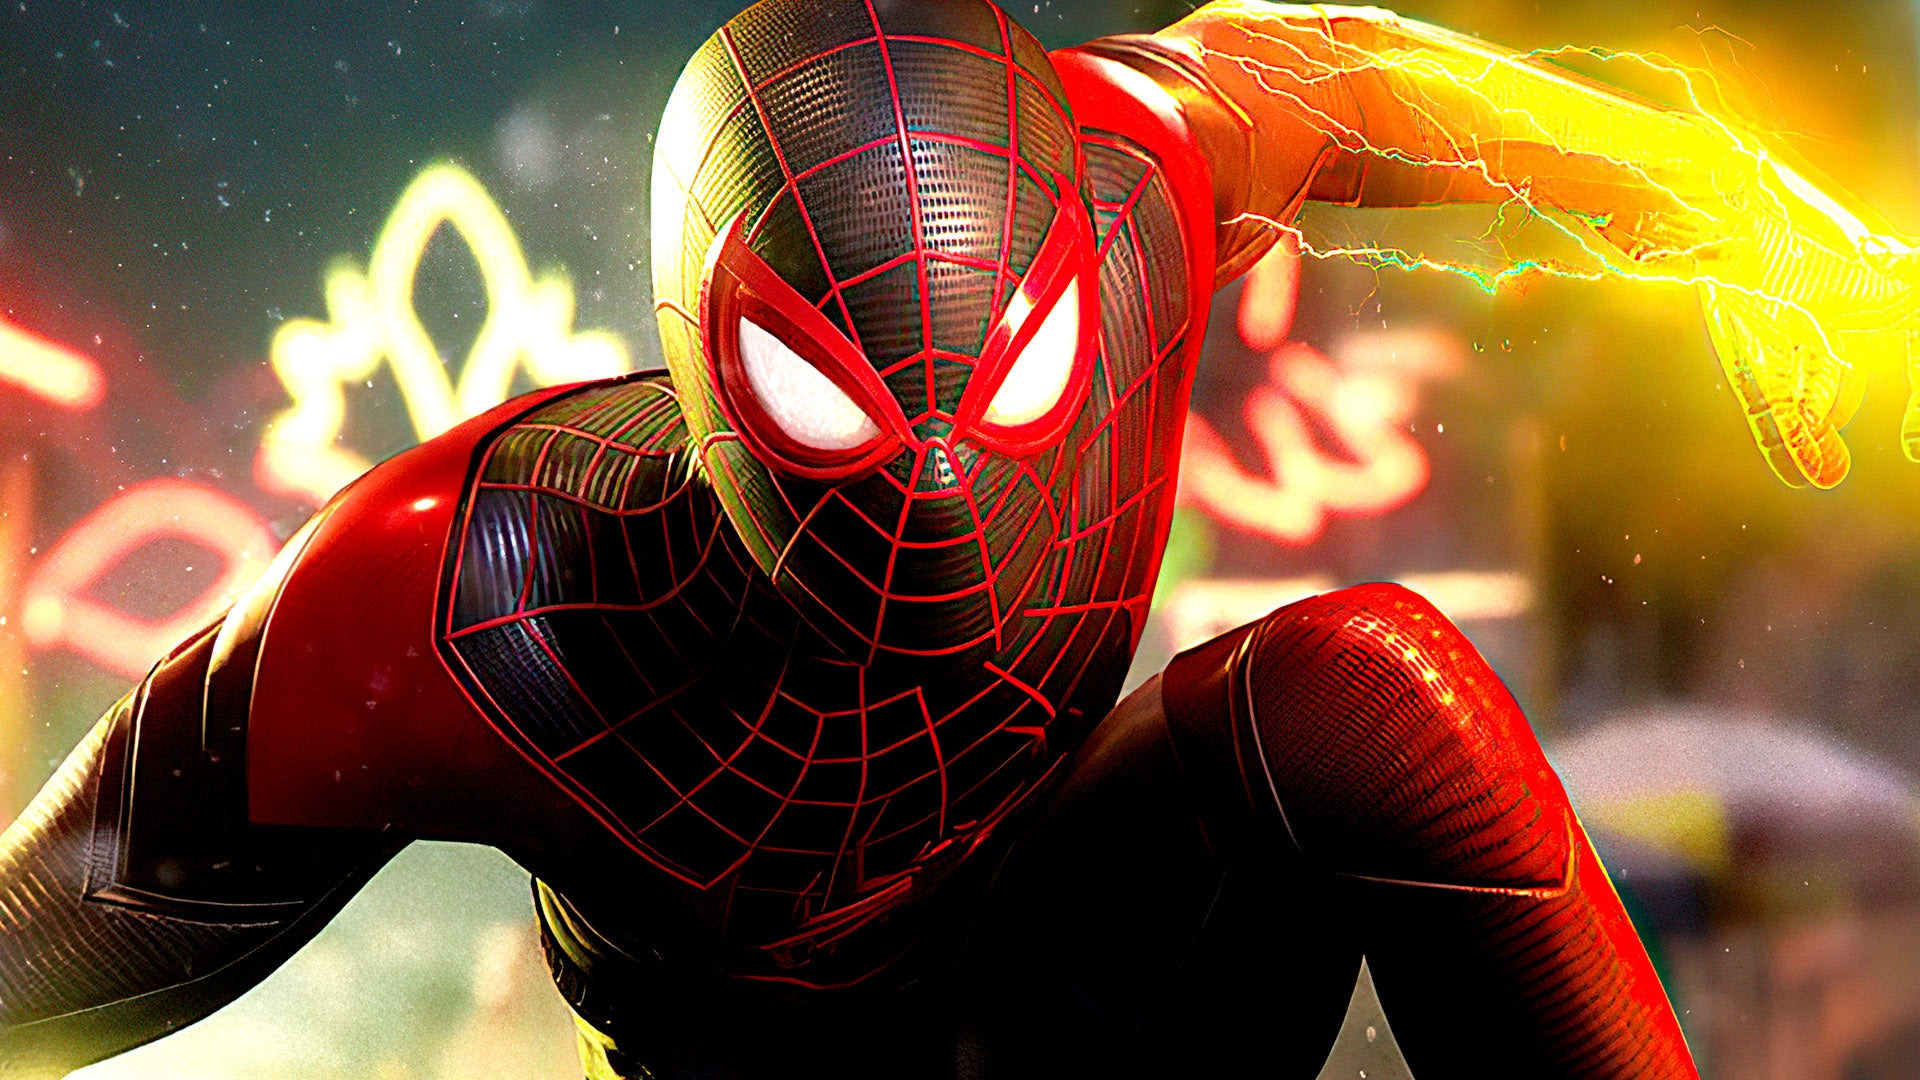 Image for DF Direct - Spider-Man: Miles Morales PS5 Gameplay Reaction - Ray Tracing, Image Quality + More!